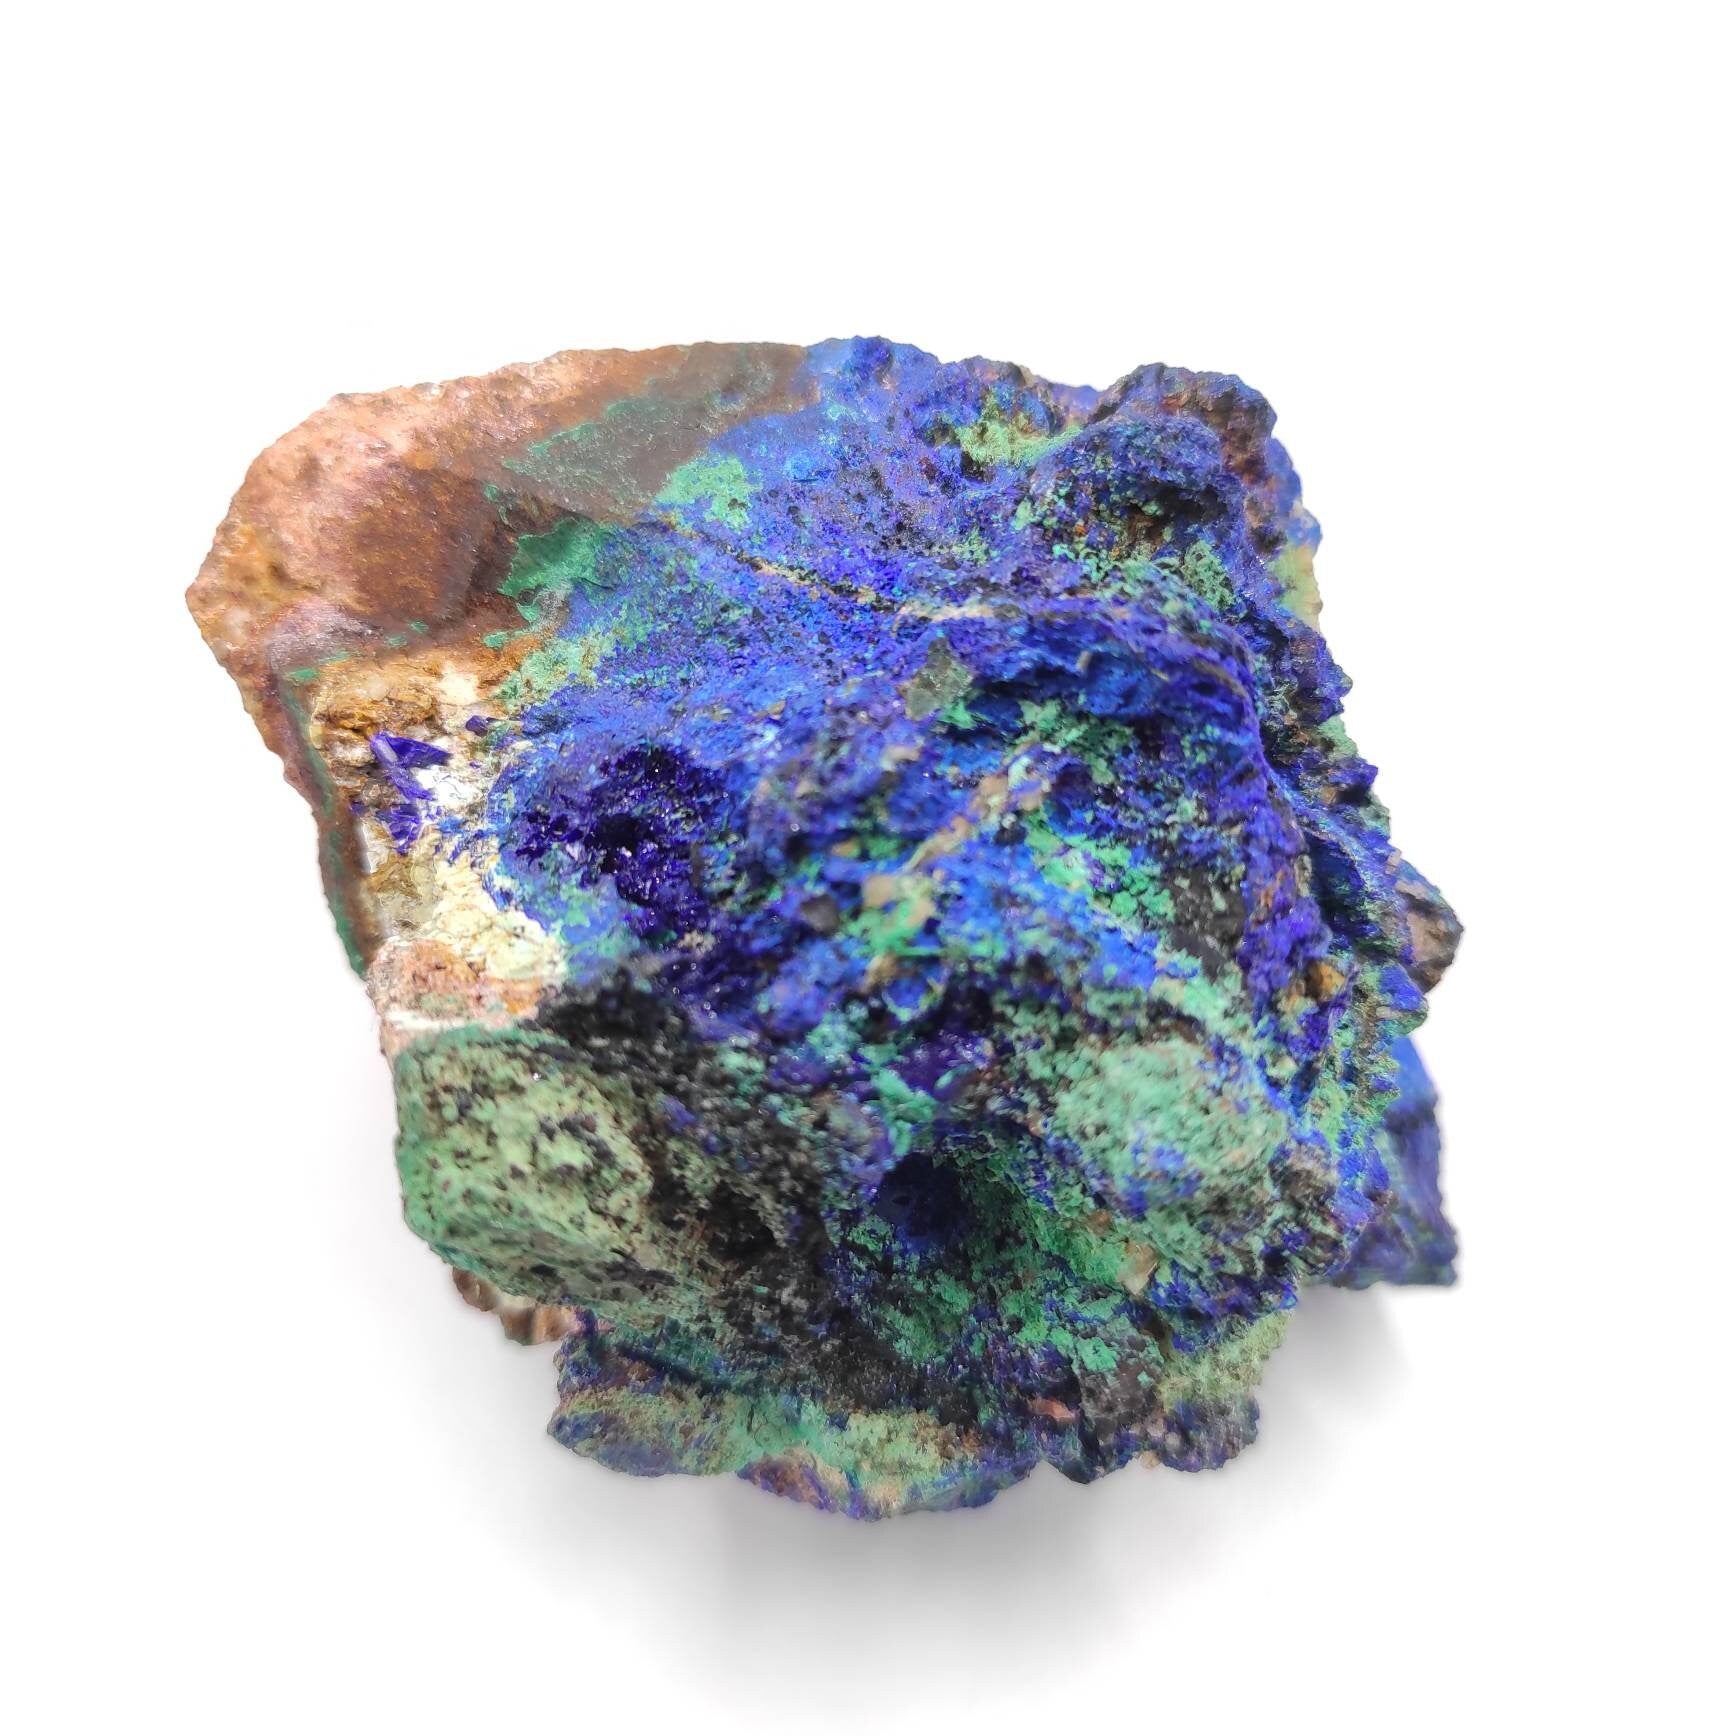 259g - Large Azurite and Malachite Crystal Specimen - Blue Azurite from Laos - Natural Raw Azurite Mineral - Rough Azurite Healing Crystal